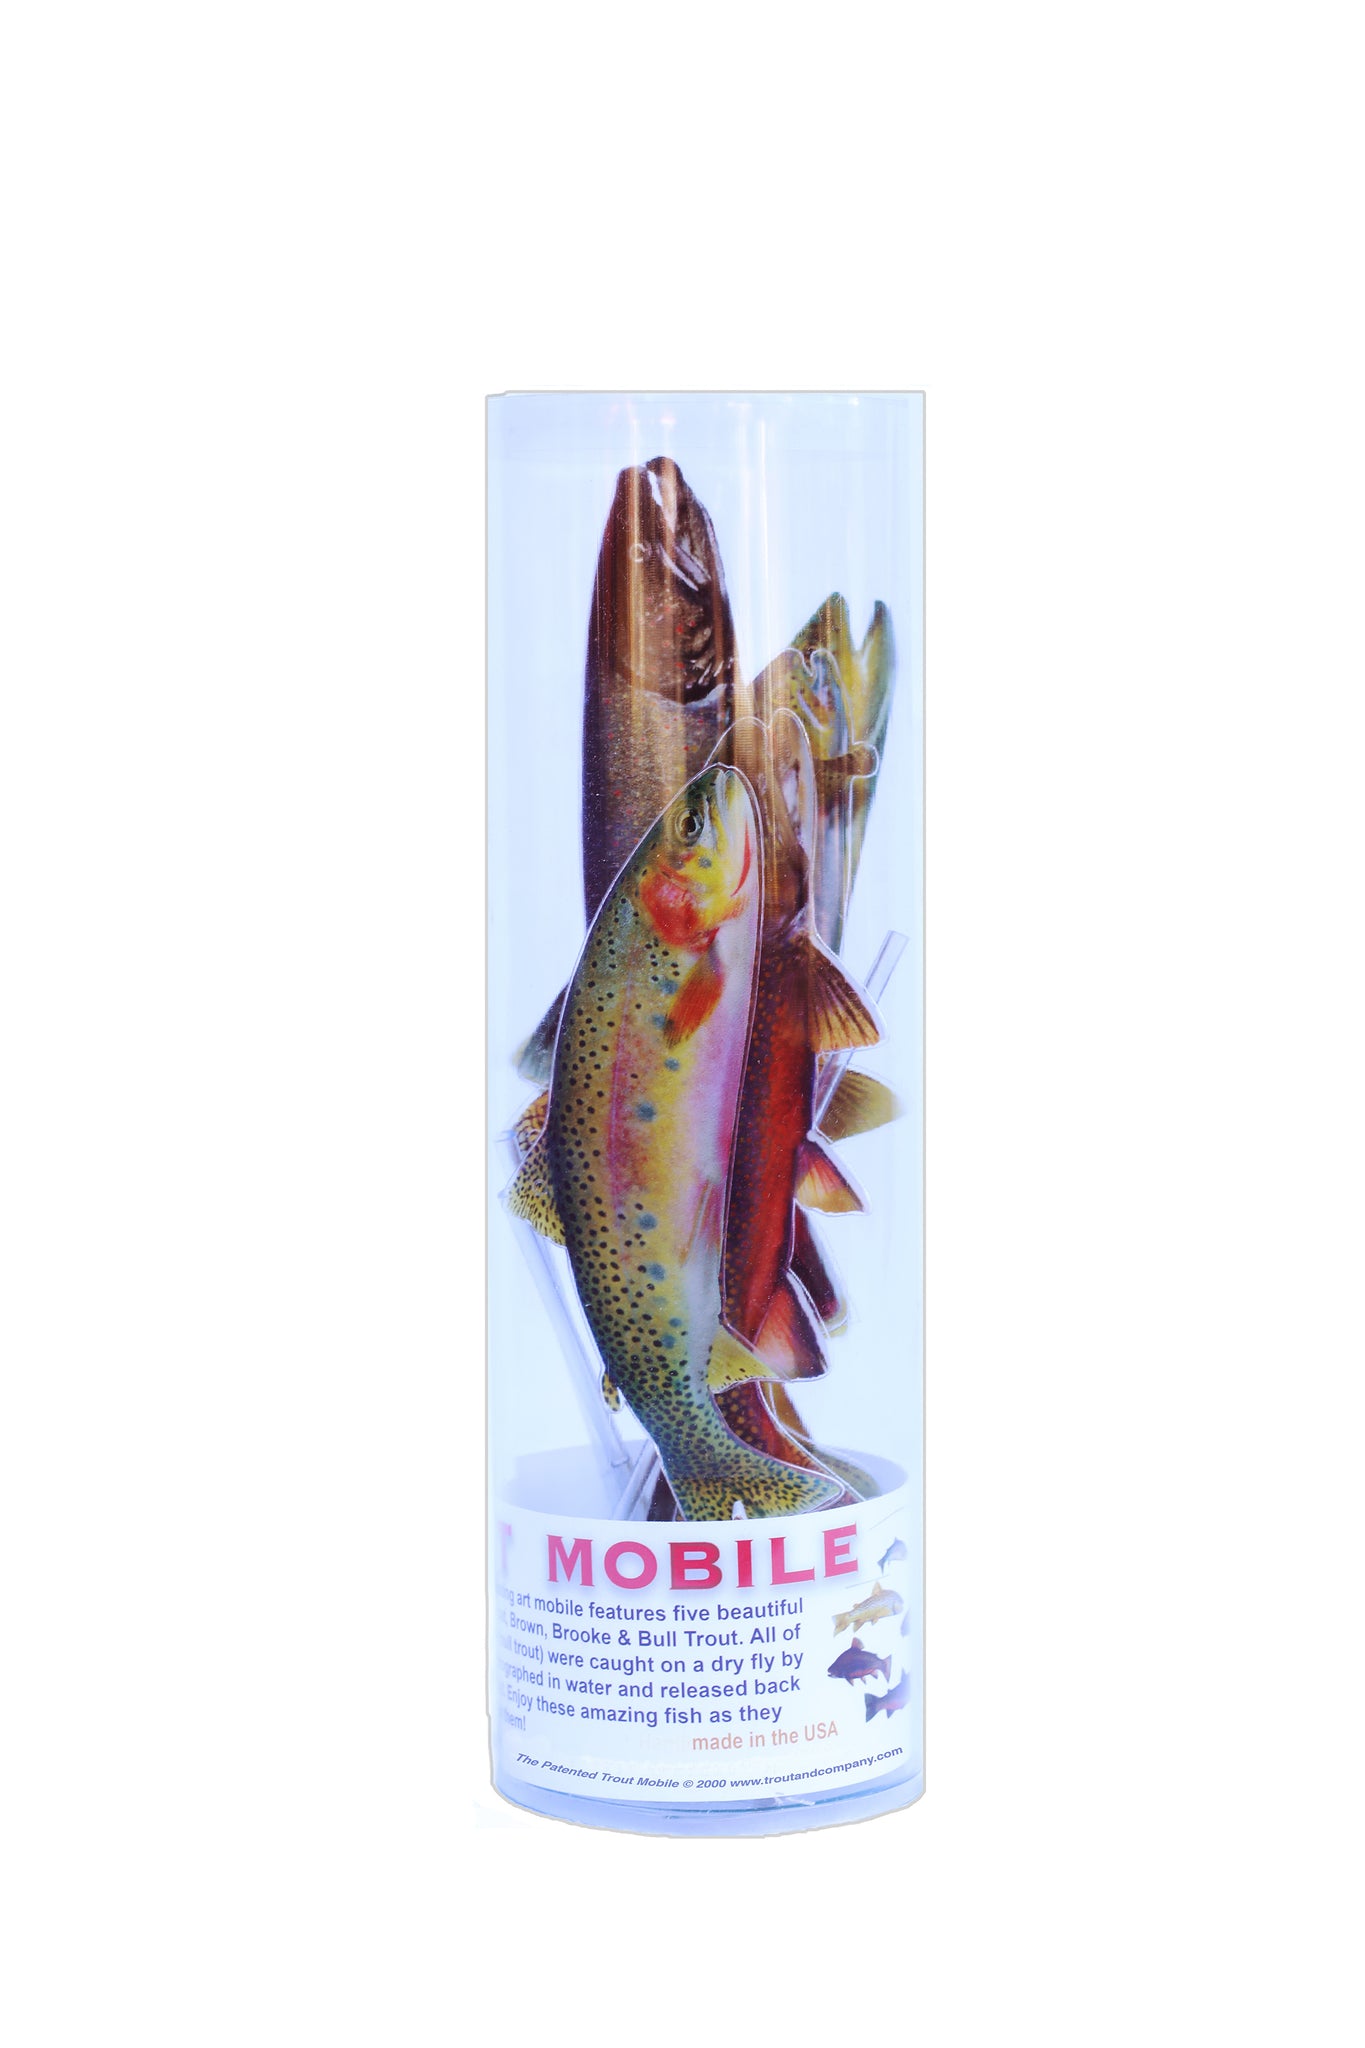 The Trout Mobile KIT